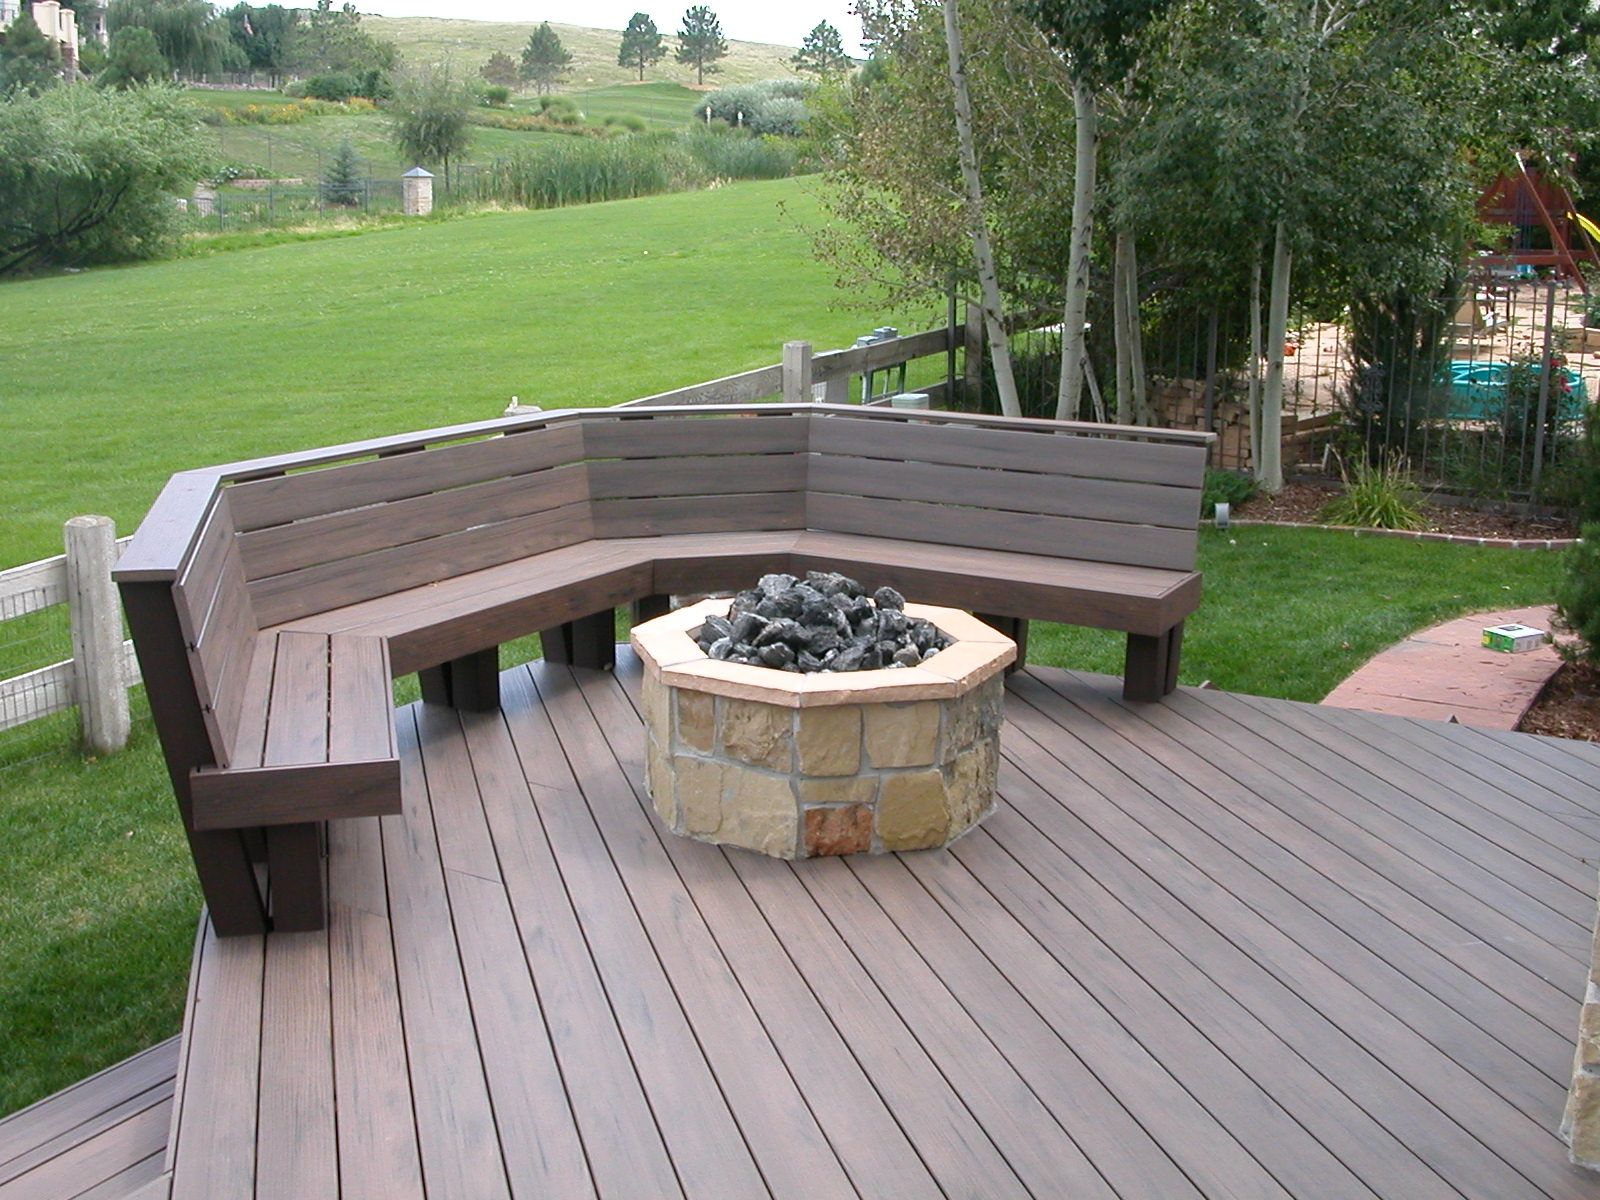 Trex Deck With Benches Fire Pit Halliday Built Decks Deck Fire throughout proportions 1600 X 1200